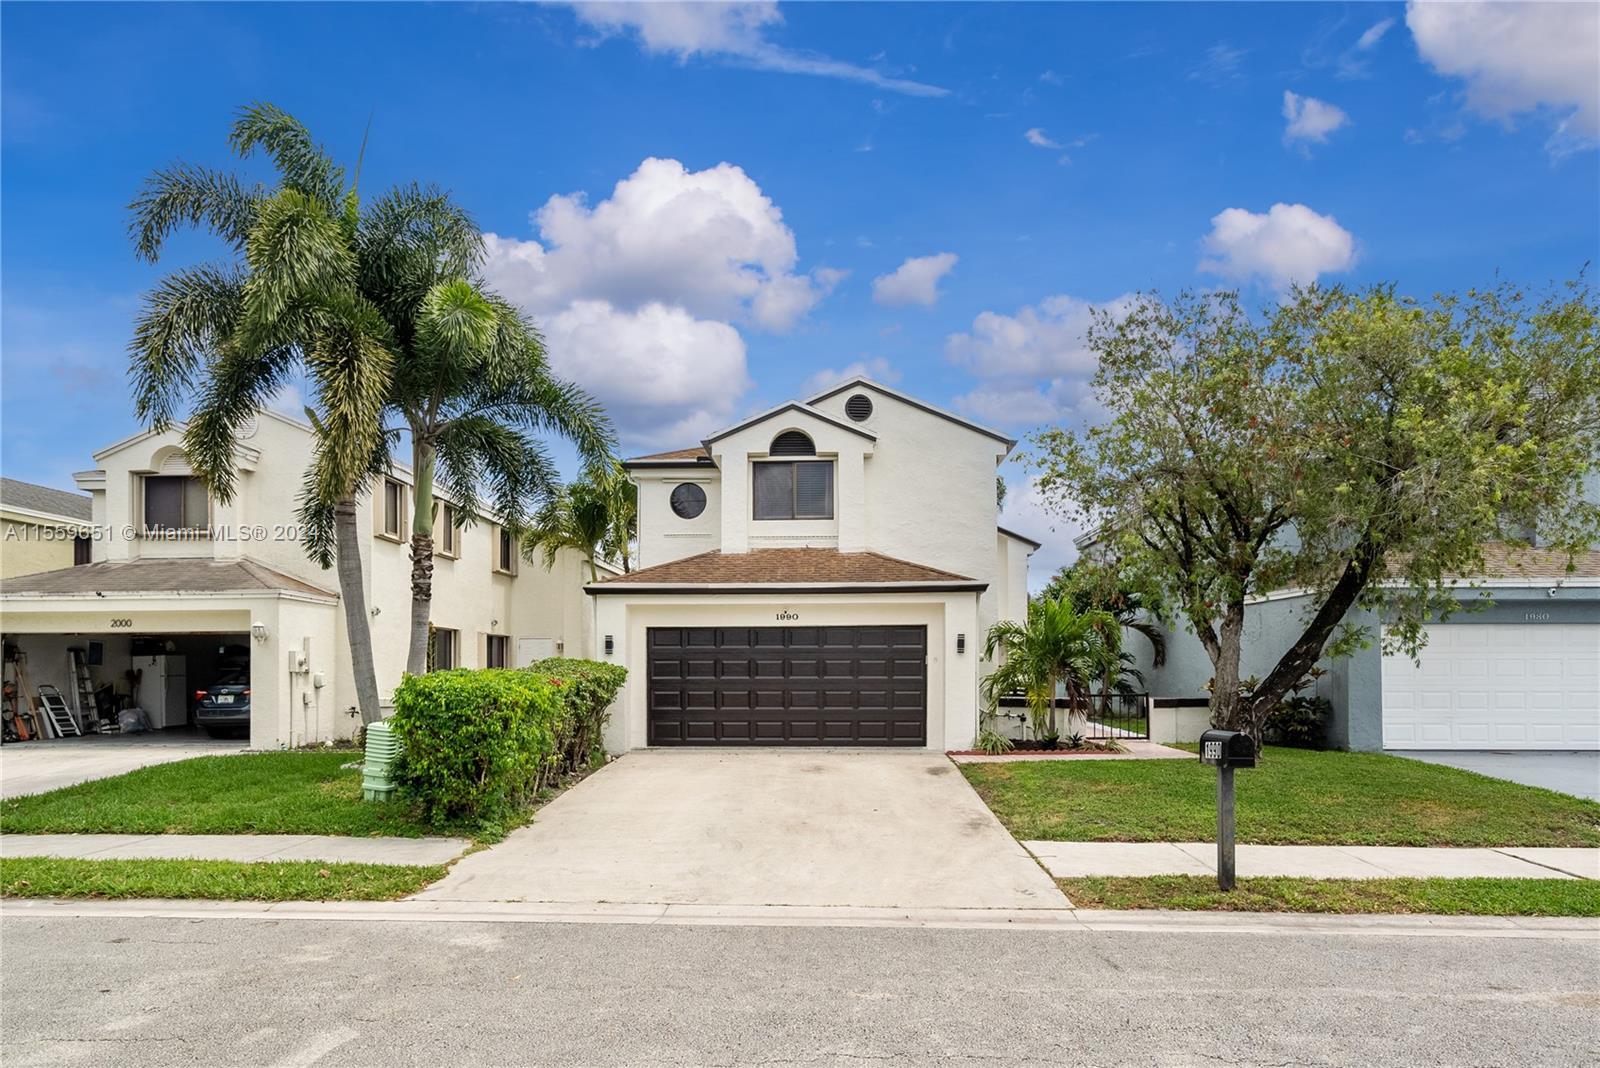 Photo of 1990 NW 34th Ave in Coconut Creek, FL